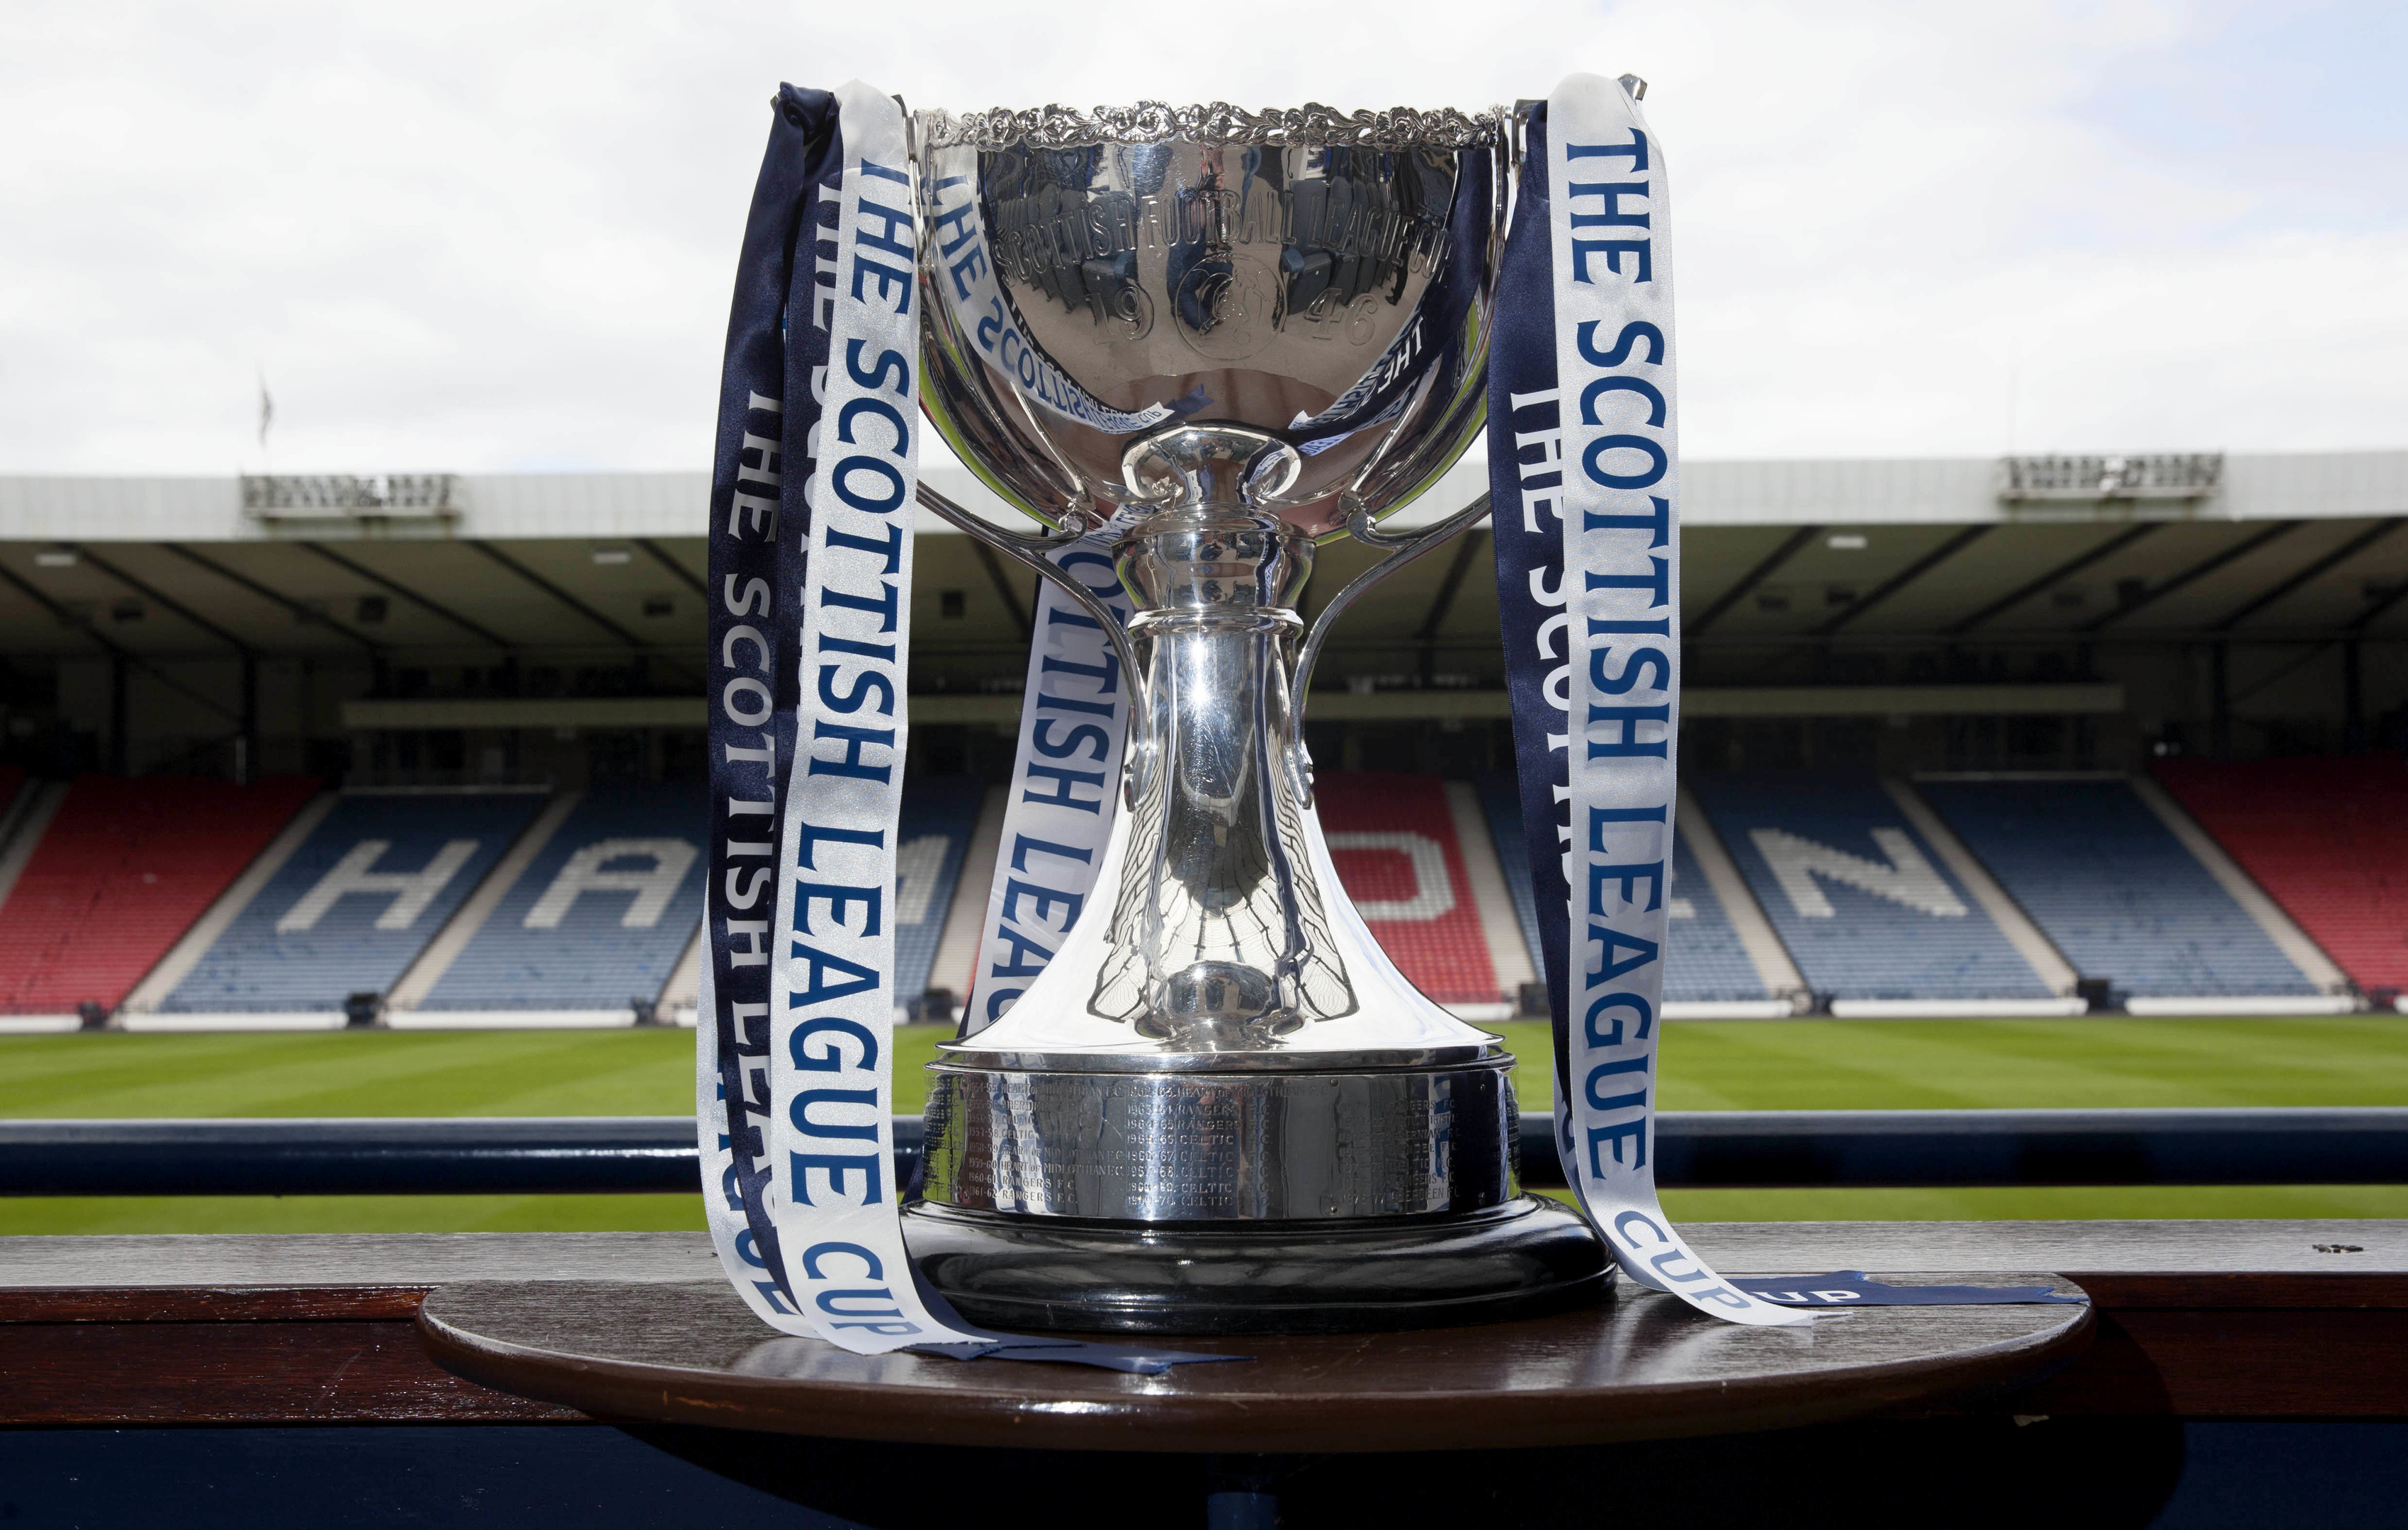 Scottish League Cup final date moved to November next season Evening